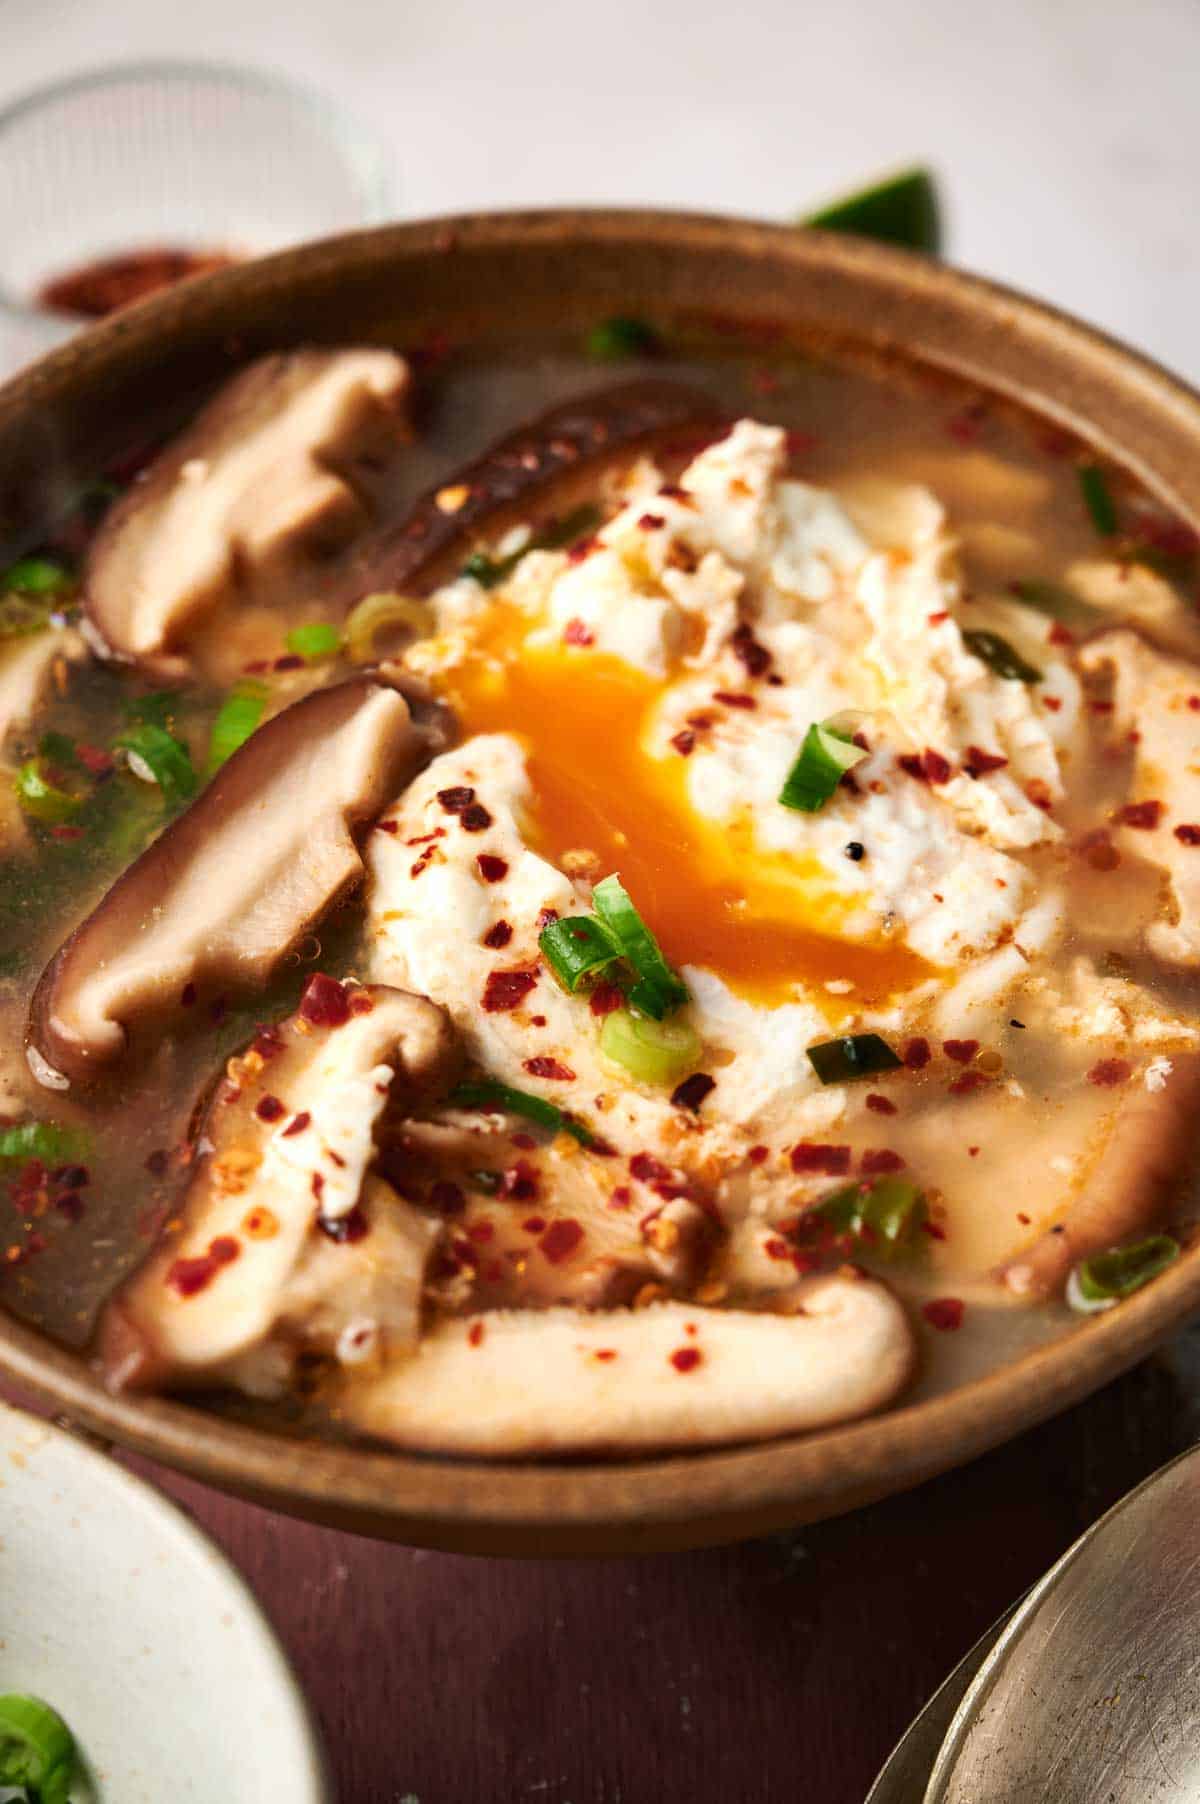 A bowl of Korean tofu soup with vegetables and eggs.